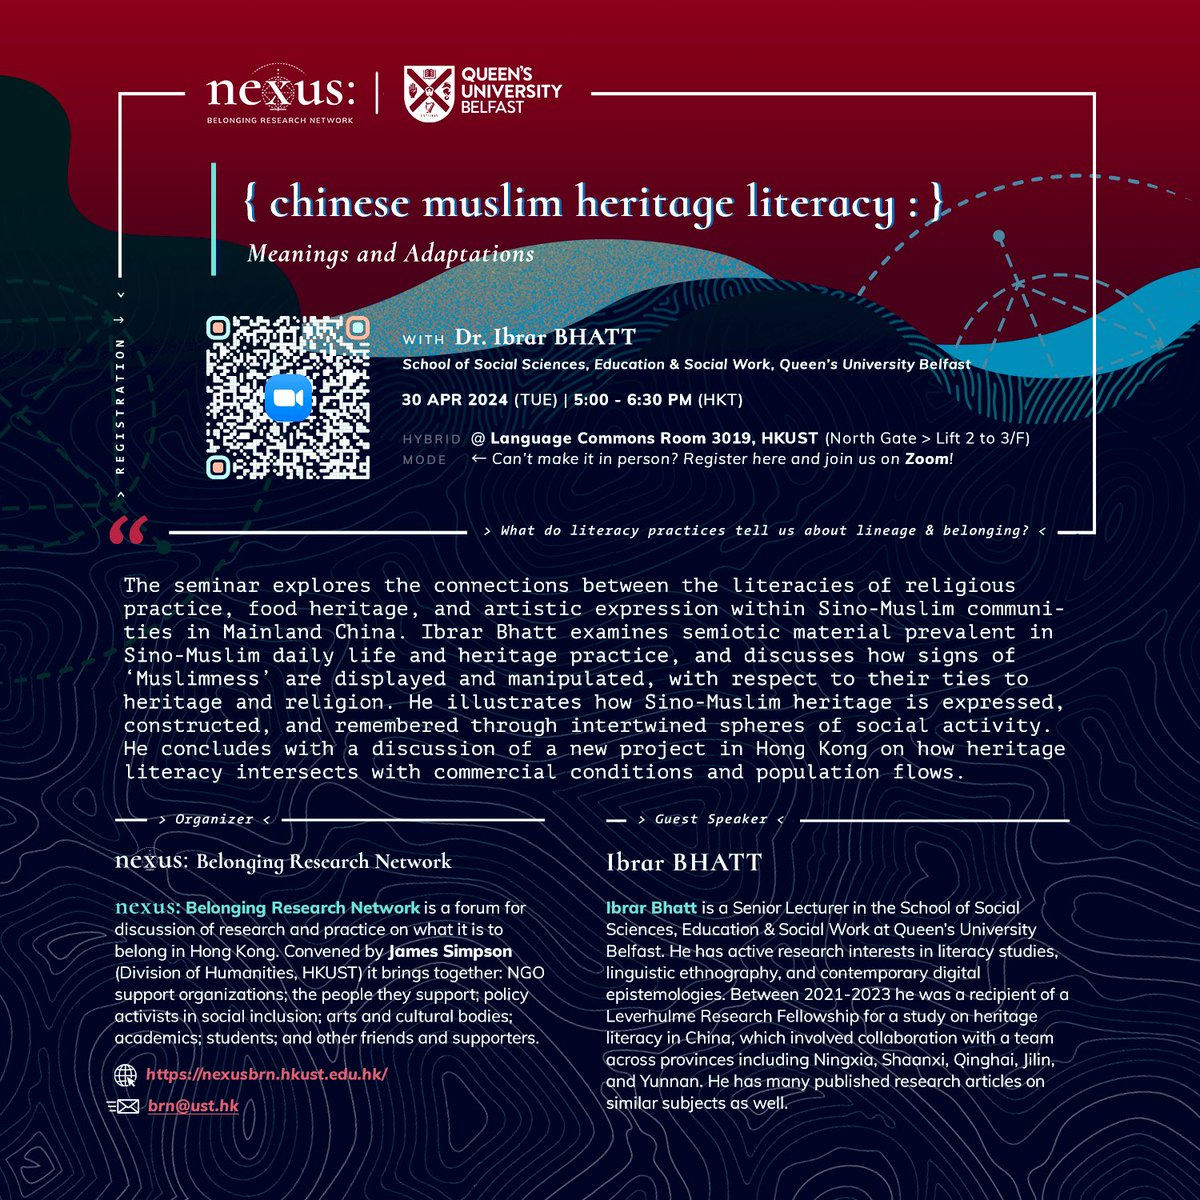 This is my talk at Hong Kong University of Science & Technology at the end of this month. Looking forward to meeting colleagues at the “Belonging Network” and sharing research. 
@hkust @CLER_QUB @QUBSSESW @SinoMuslimLit @LeverhulmeTrust @BritishAcademy_